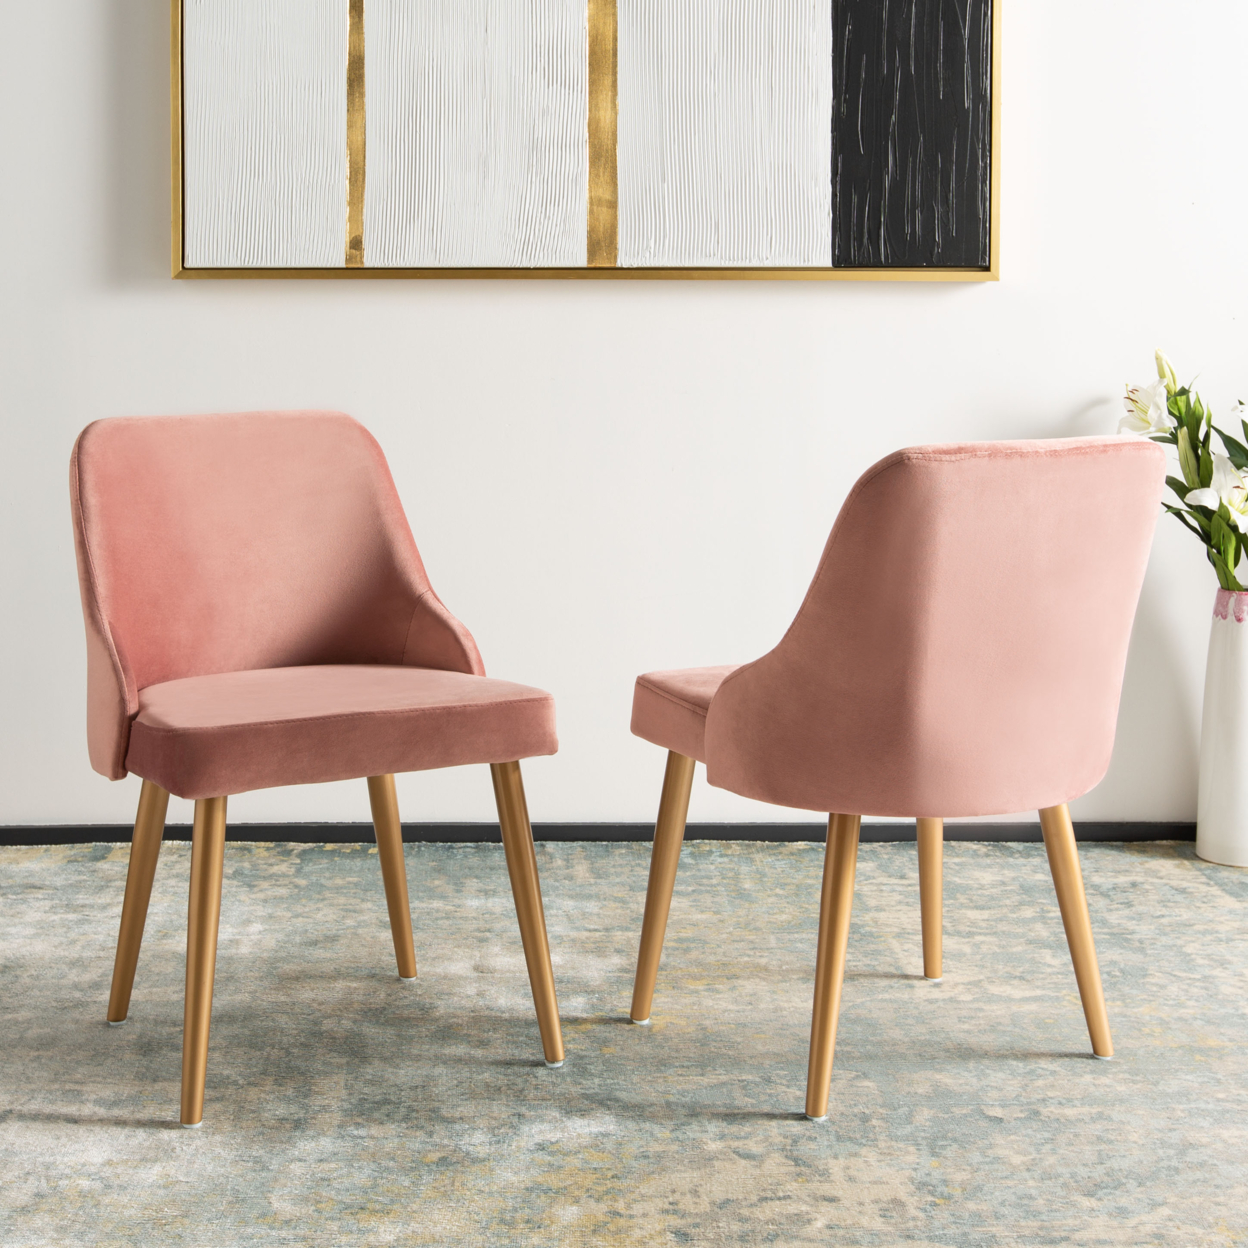 SAFAVIEH Lulu Upholstered Dining Chair Set Of 2 Dusty Rose / Gold